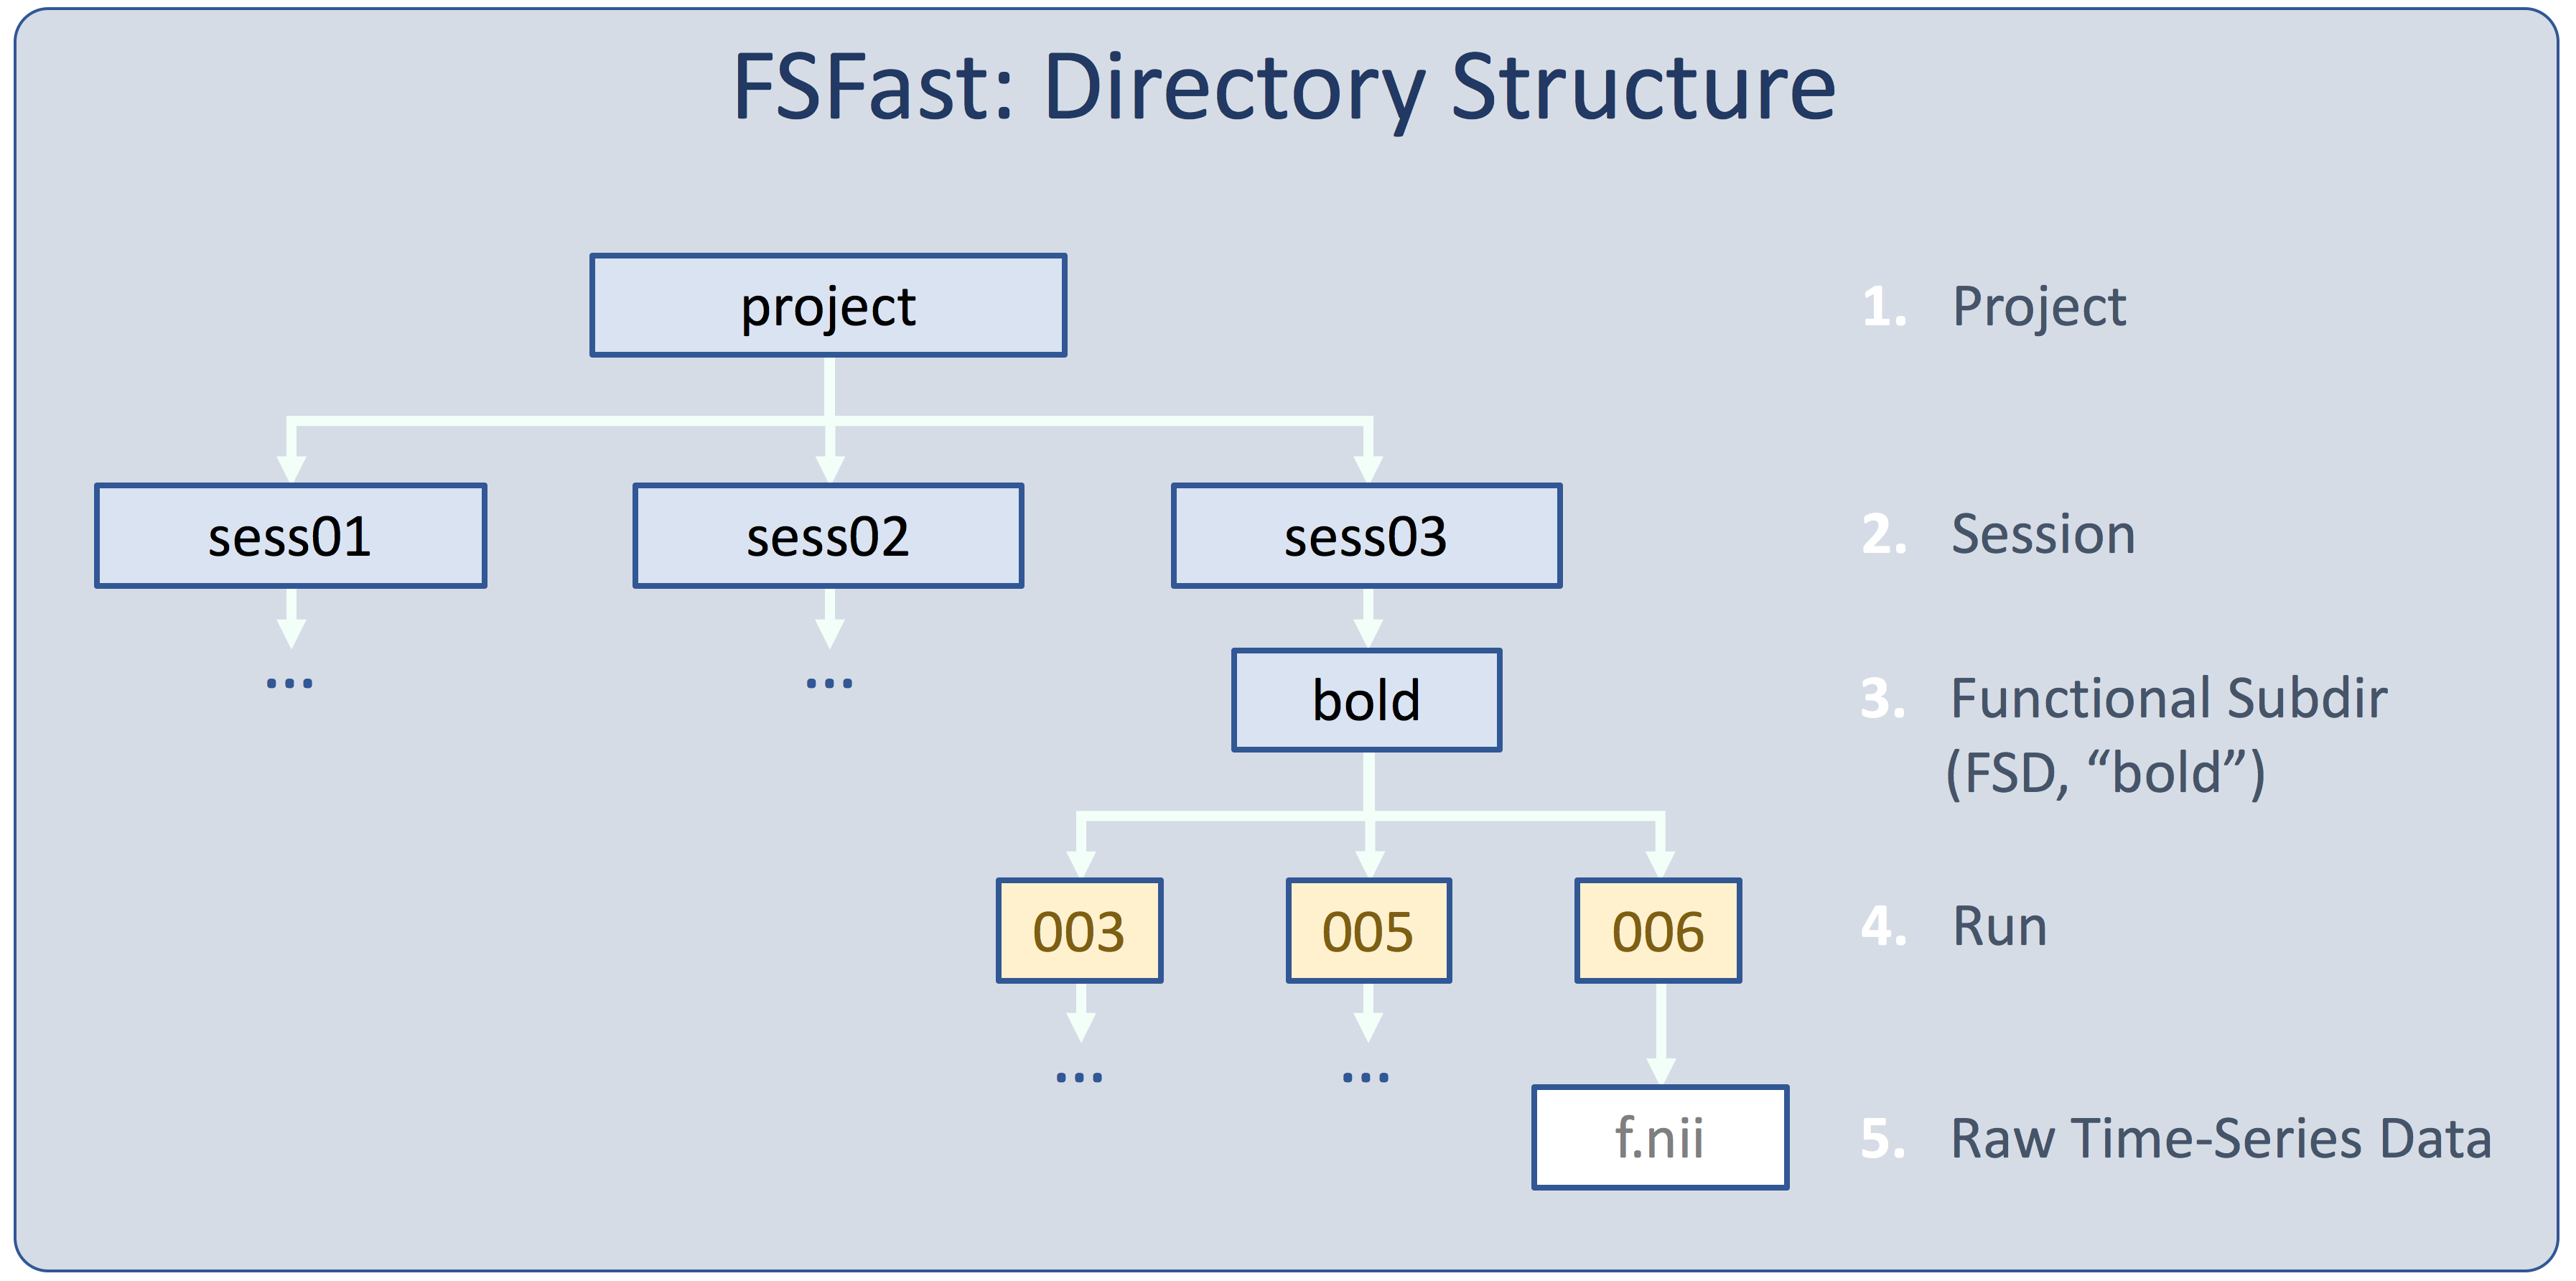 fsfaststructure.png